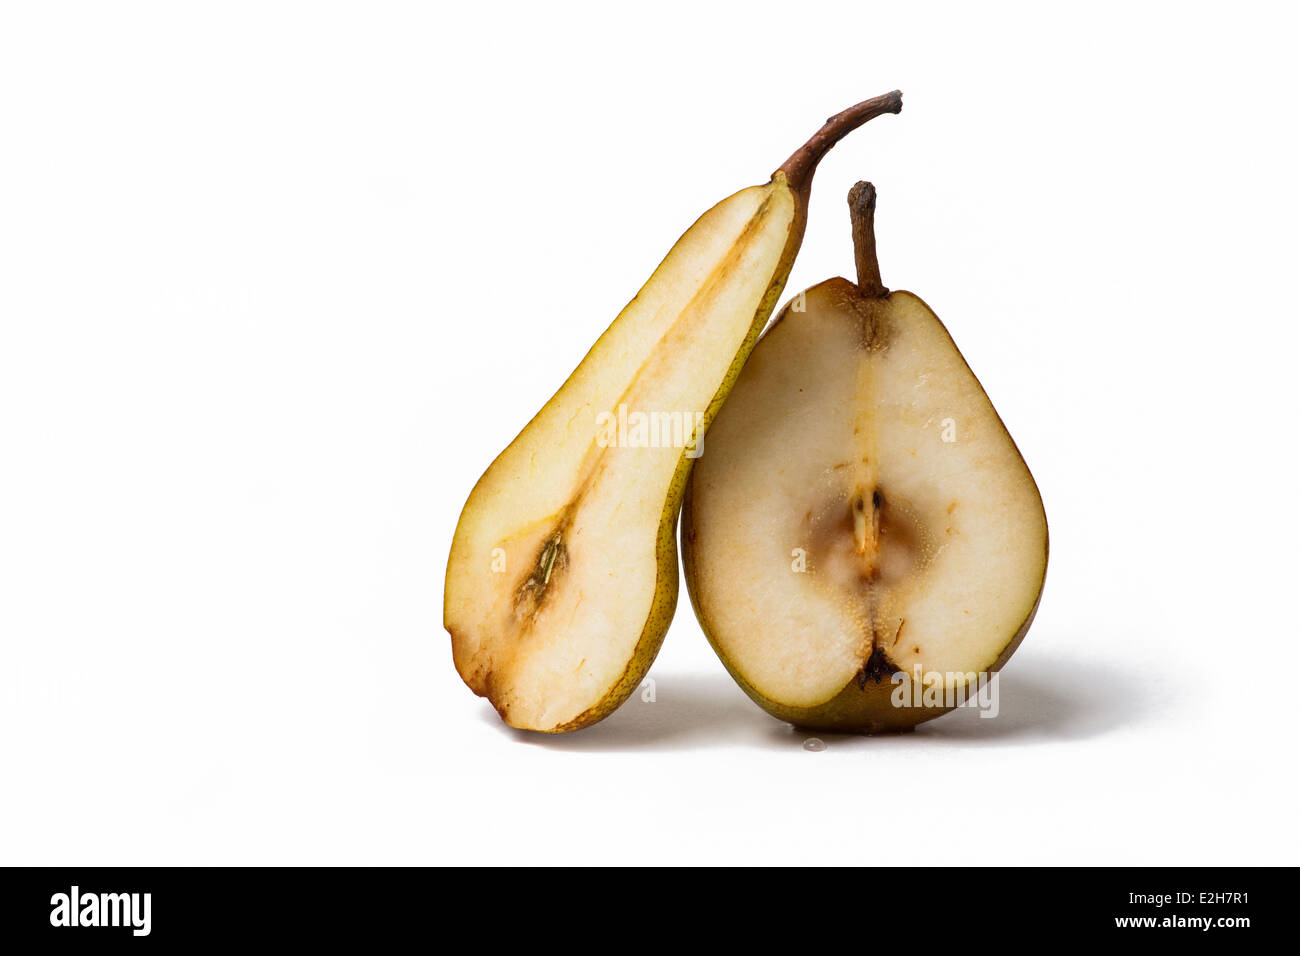 Two pear fruits halves of different shapes leaning against each other Stock Photo